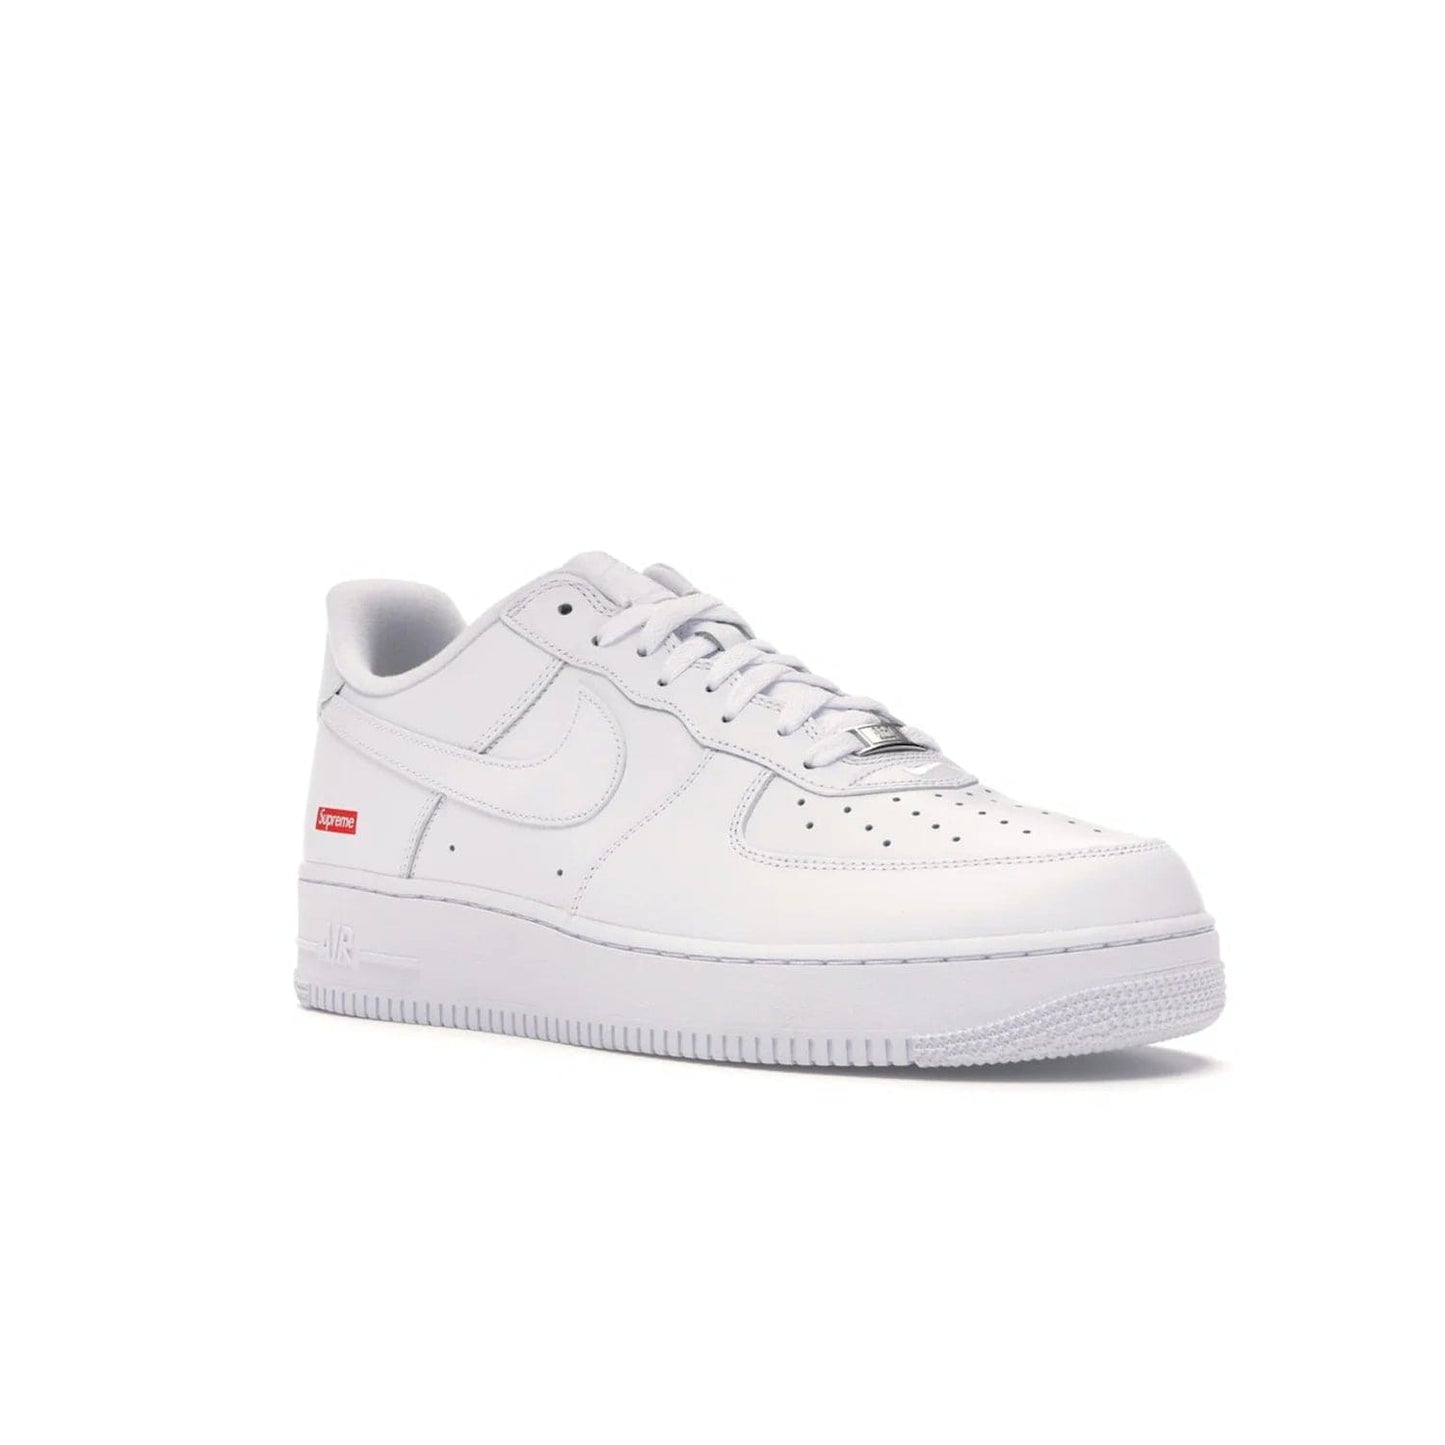 Nike Air Force 1 Low Supreme White - Image 5 - Only at www.BallersClubKickz.com - The Nike Air Force 1 Low Supreme White - a classic all-white design featuring premium leather and the iconic red Supreme Box Logo. Iconic sneakers embodying NYC style and culture. Released March 2020.